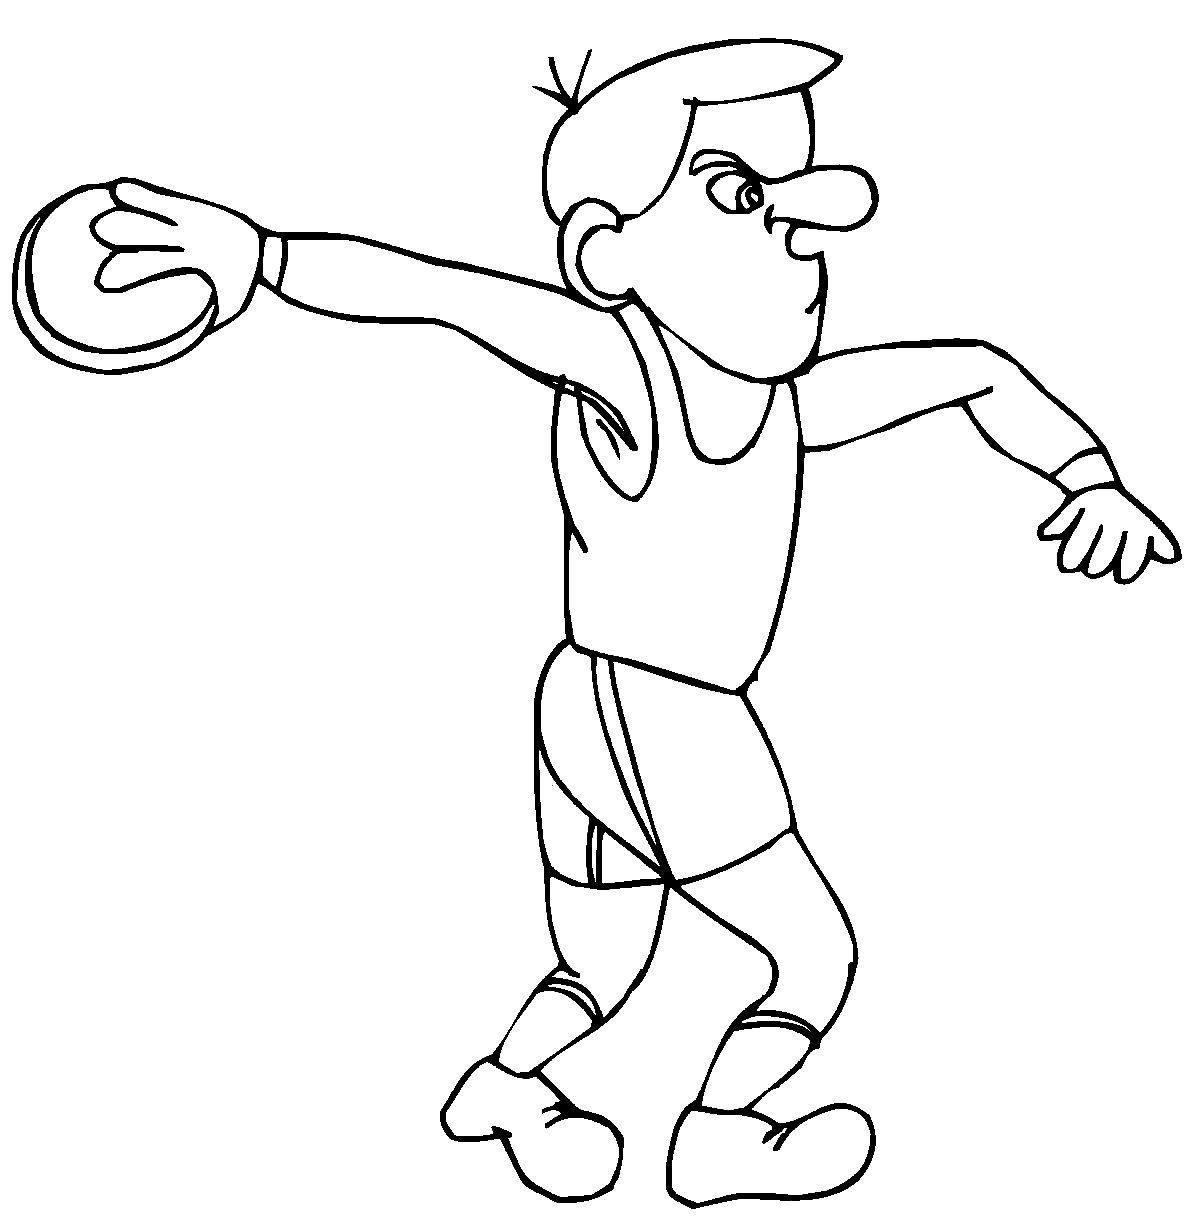 Discus Throw Coloring Pages